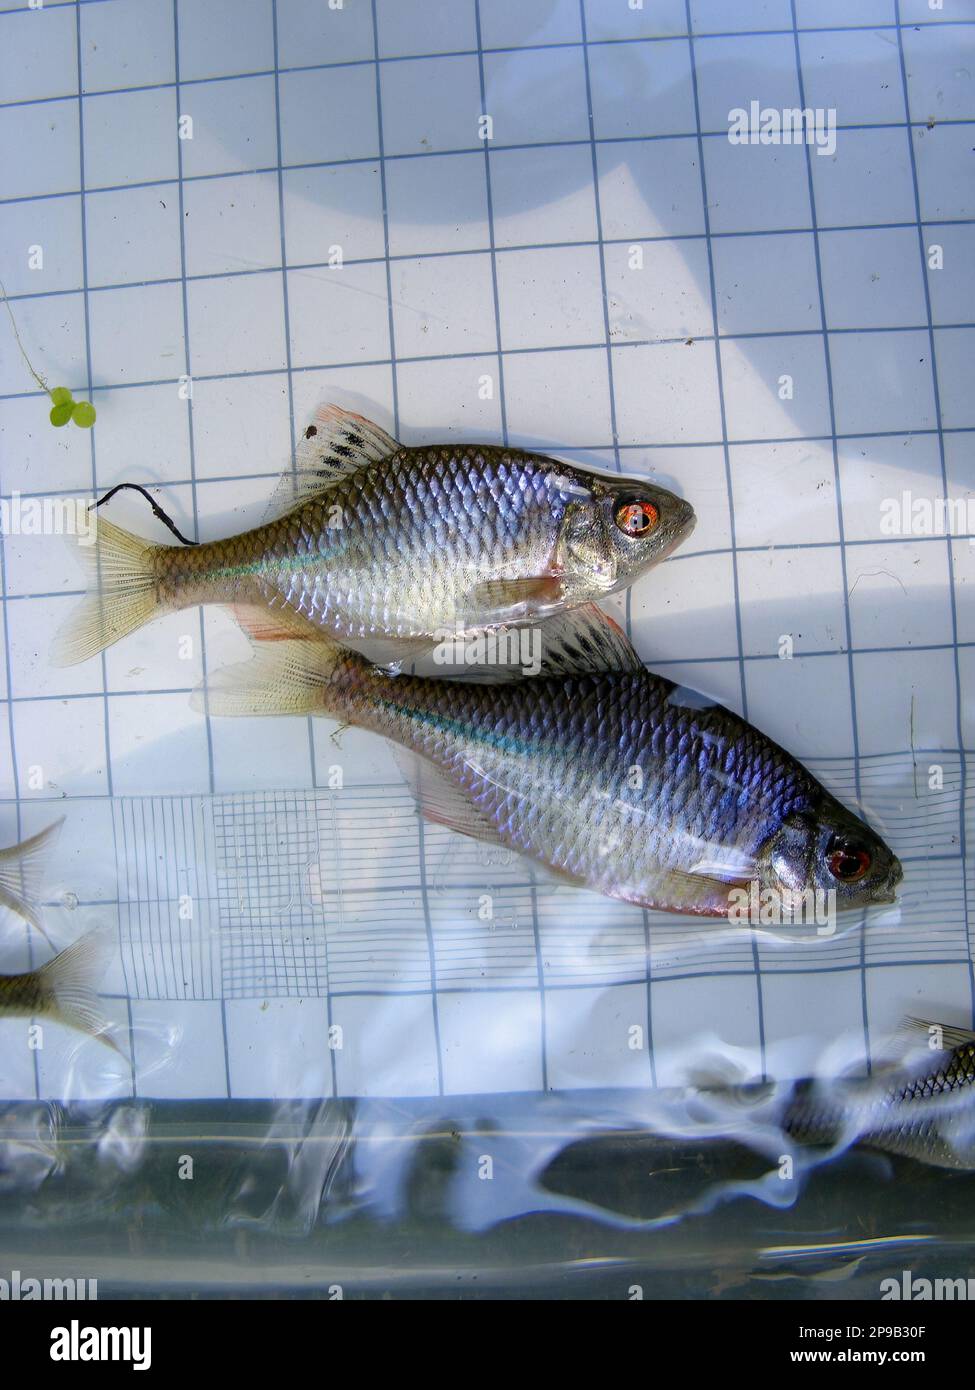 The Amur bitterling (Rhodeus sericeus) is a small fish of the carp family on the background of a 5 mm measurement grid. Ichthyology research. Stock Photo